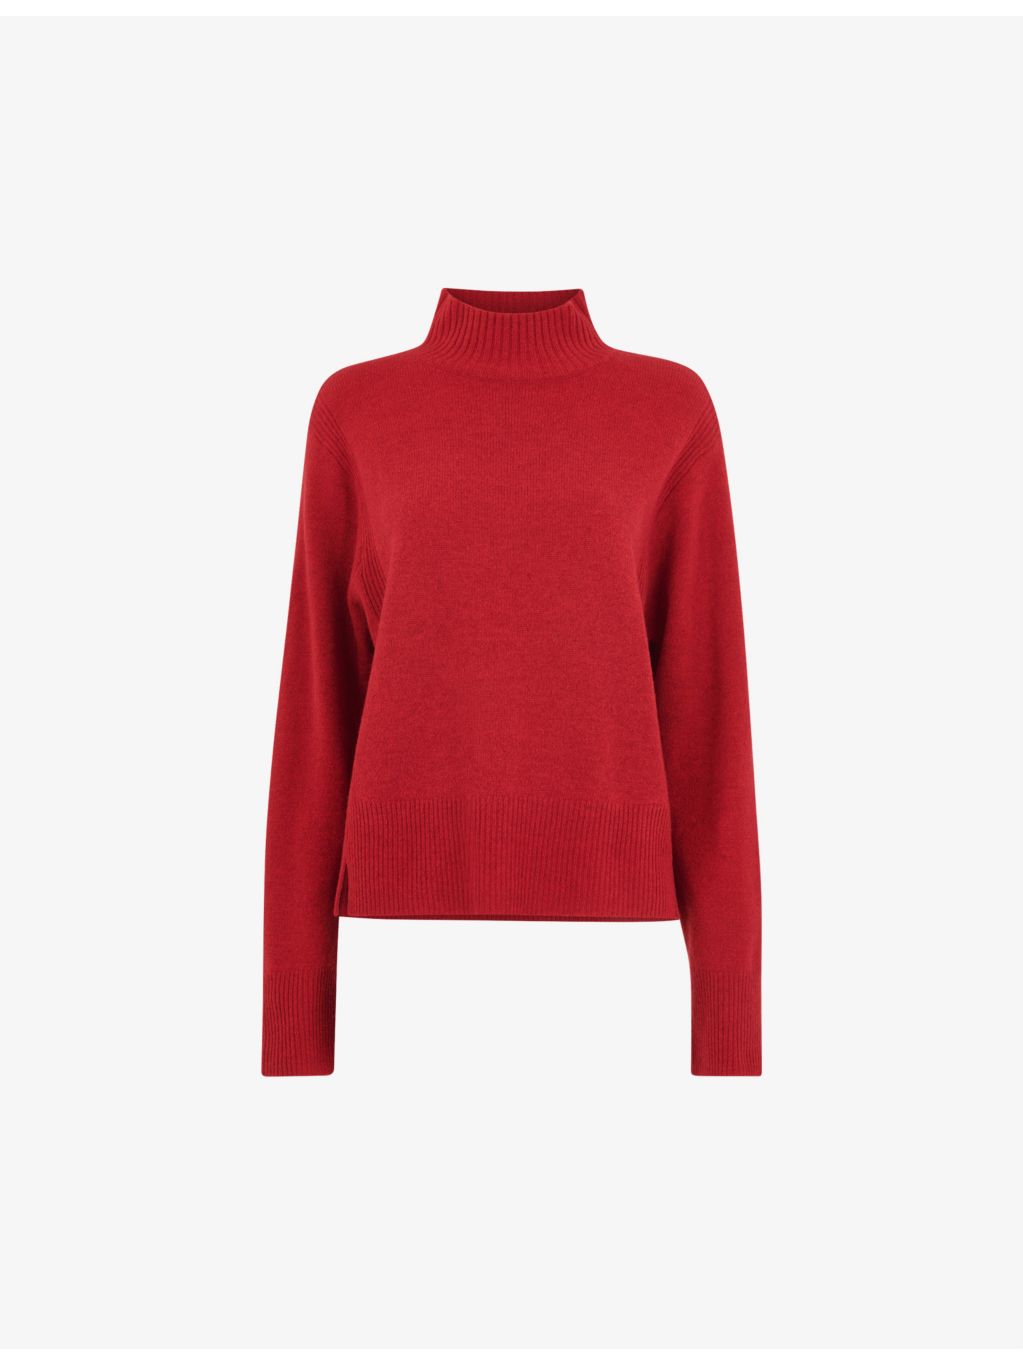 WHISTLES - Ferne wool knitted jumper